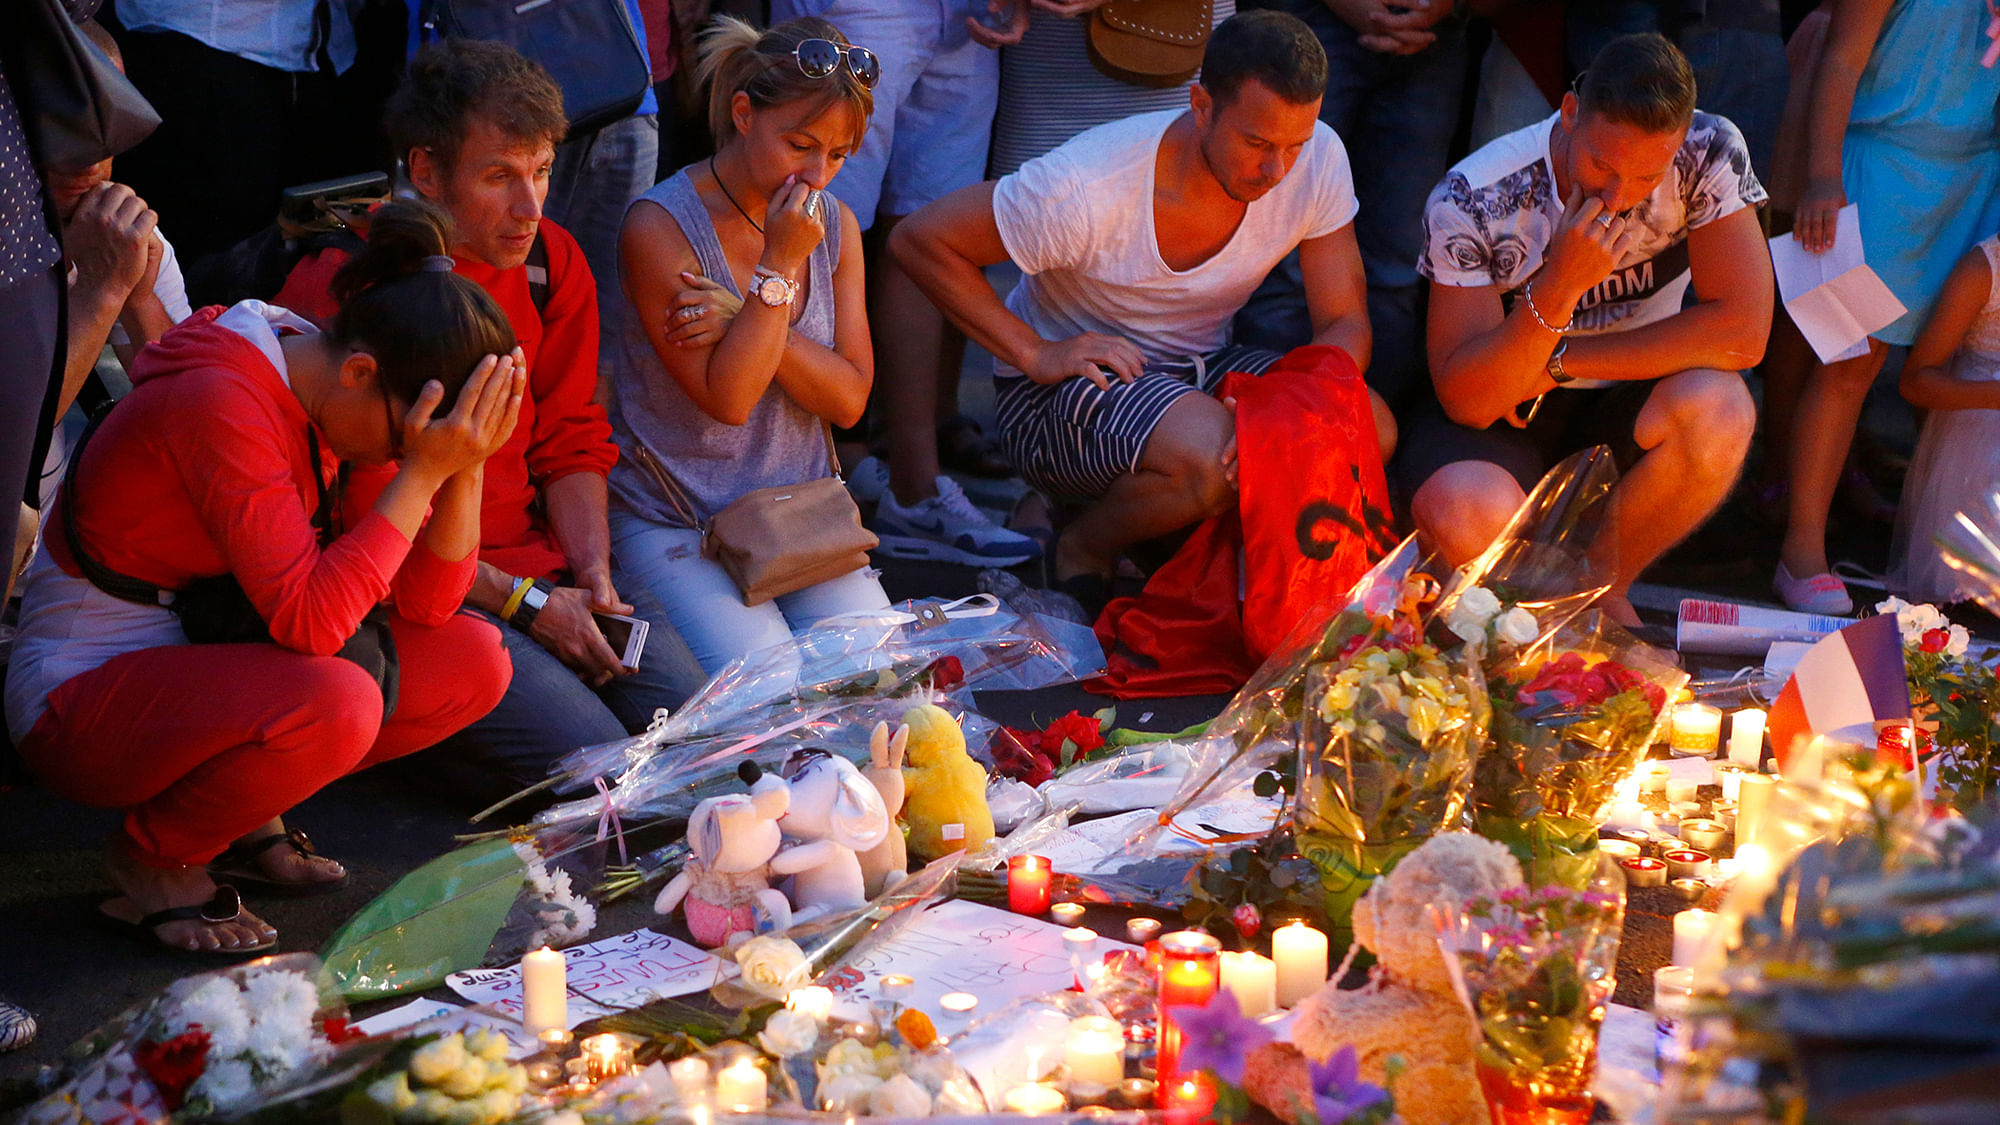 People pay homage to the victims of a truck attack at a makeshift memorial near the area where a truck mowed through revelers in Nice, southern France on Friday. (Photo: AP)